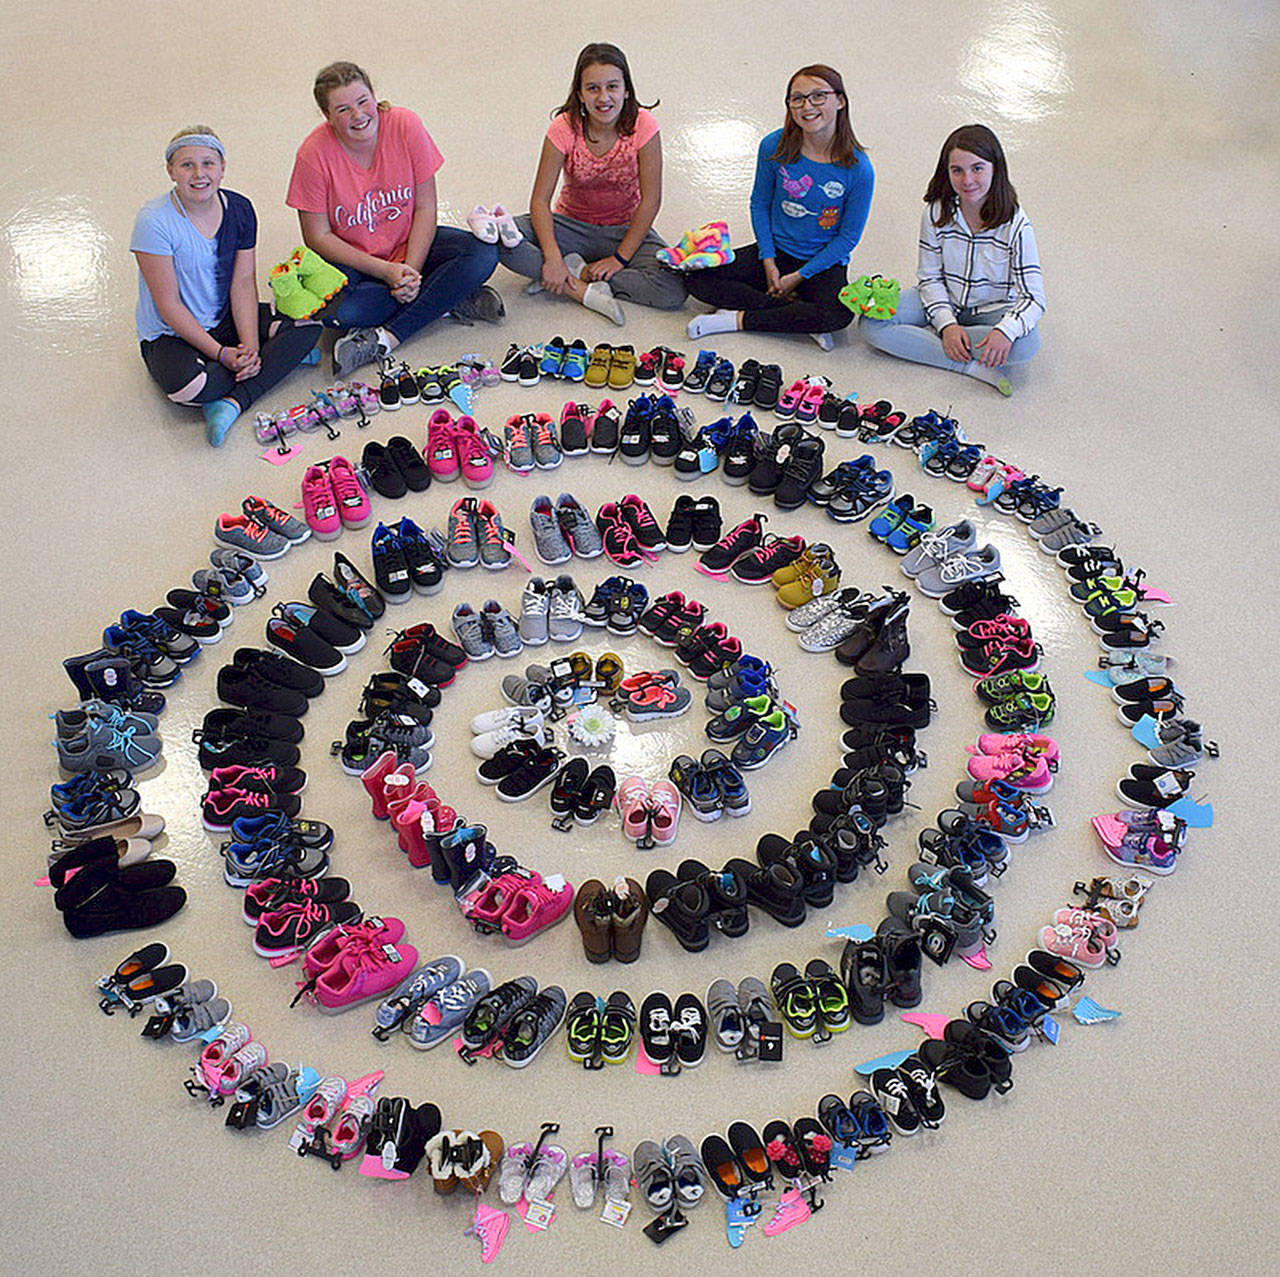 Girl Scouts with Troop 45181, from left, Adrianna Delph, Paige Krzyworz, Mia Kirner, Alexys Amaya and Izzy Taylor helped bring in more than 130 pairs of new shoes for Clallam County foster children through a recent shoe drive. Not pictured are Desirea and Mya Spalding. See story on Page 11. Submitted photo